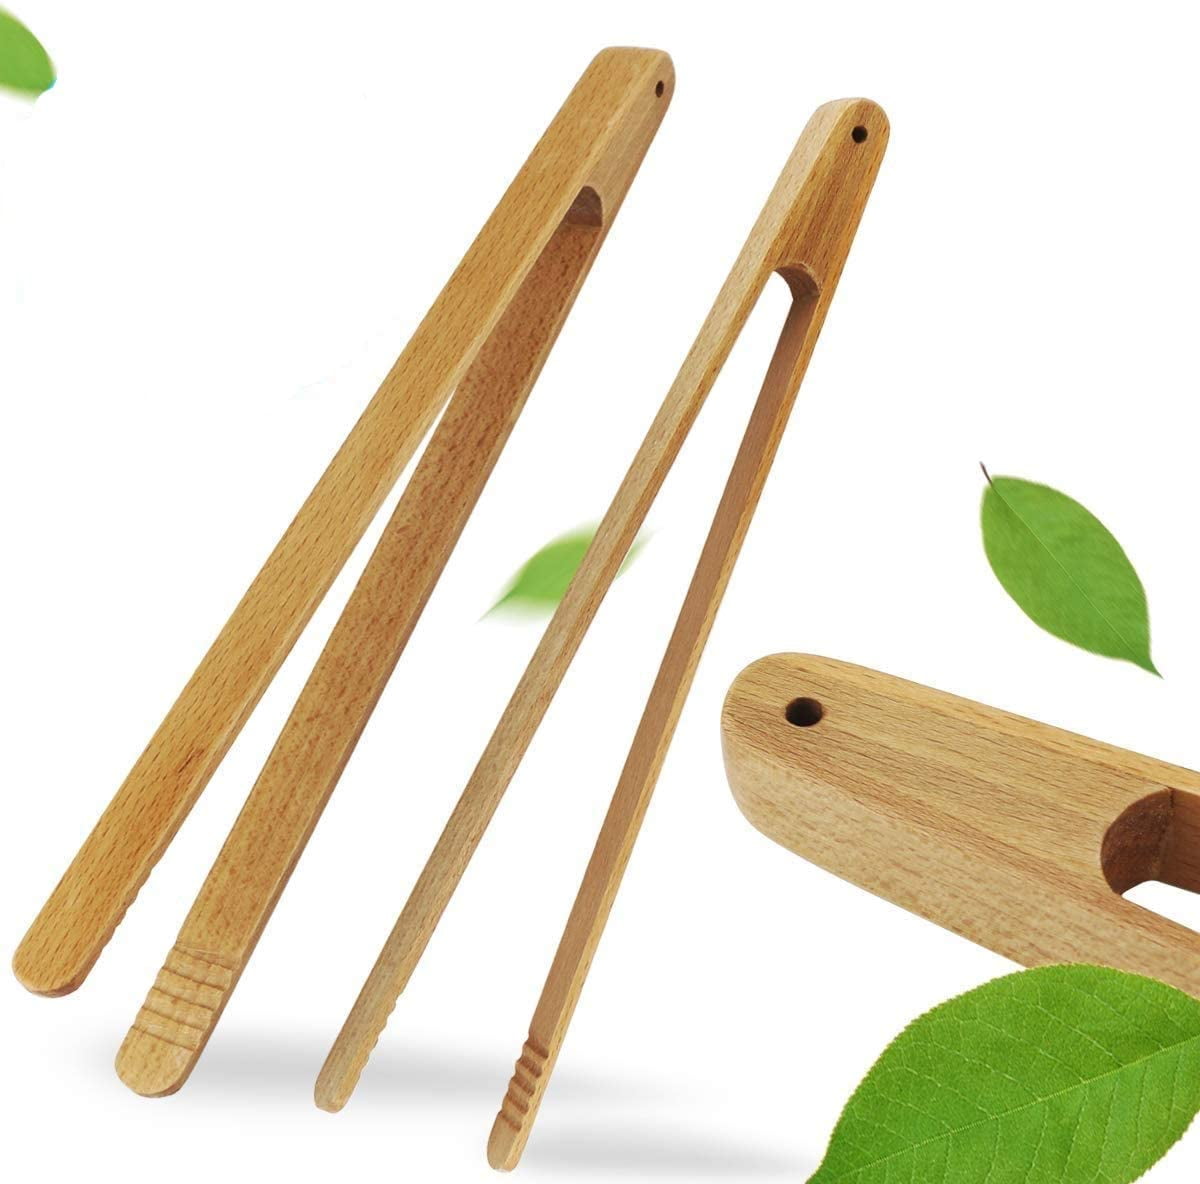 Set Of 4 Beech Wooden Kitchen BBQ Bread Toast Cooking Food Salad Serving Tongs